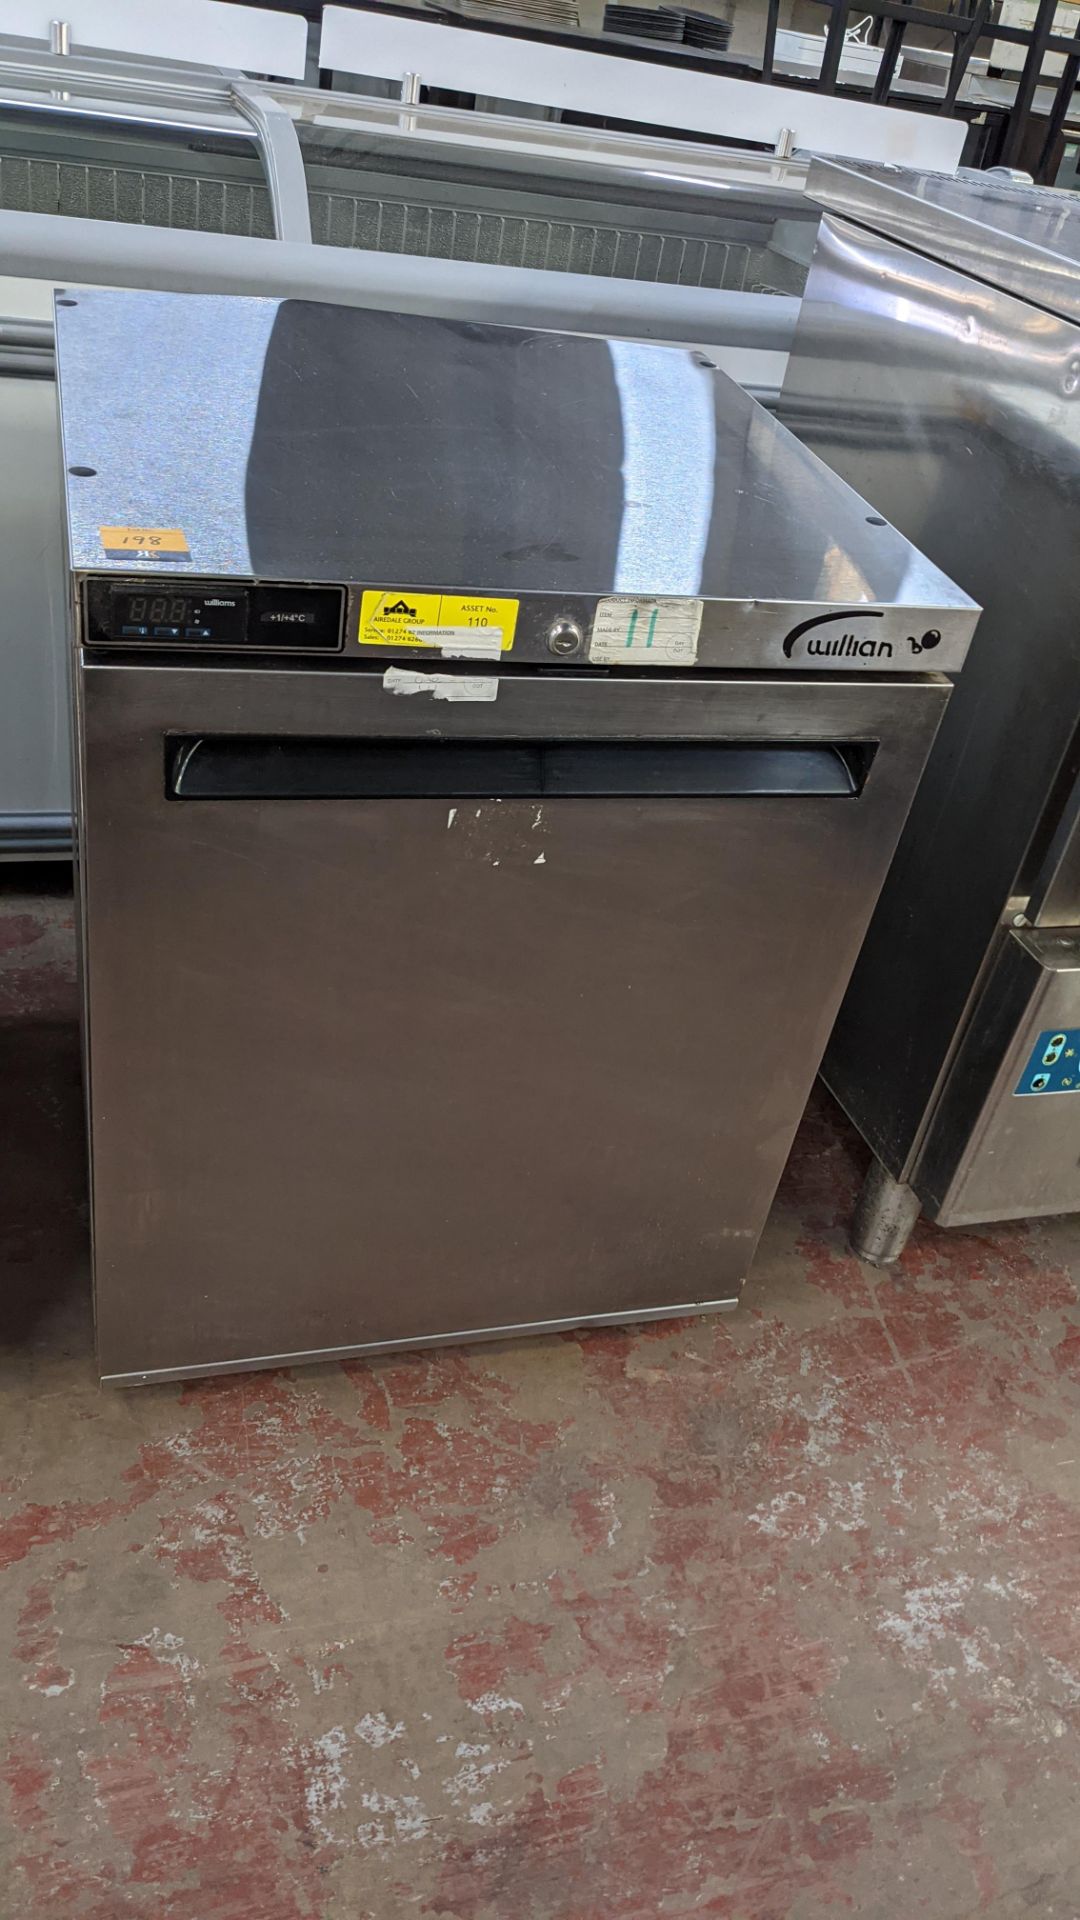 Williams stainless steel under counter fridge - Image 2 of 5